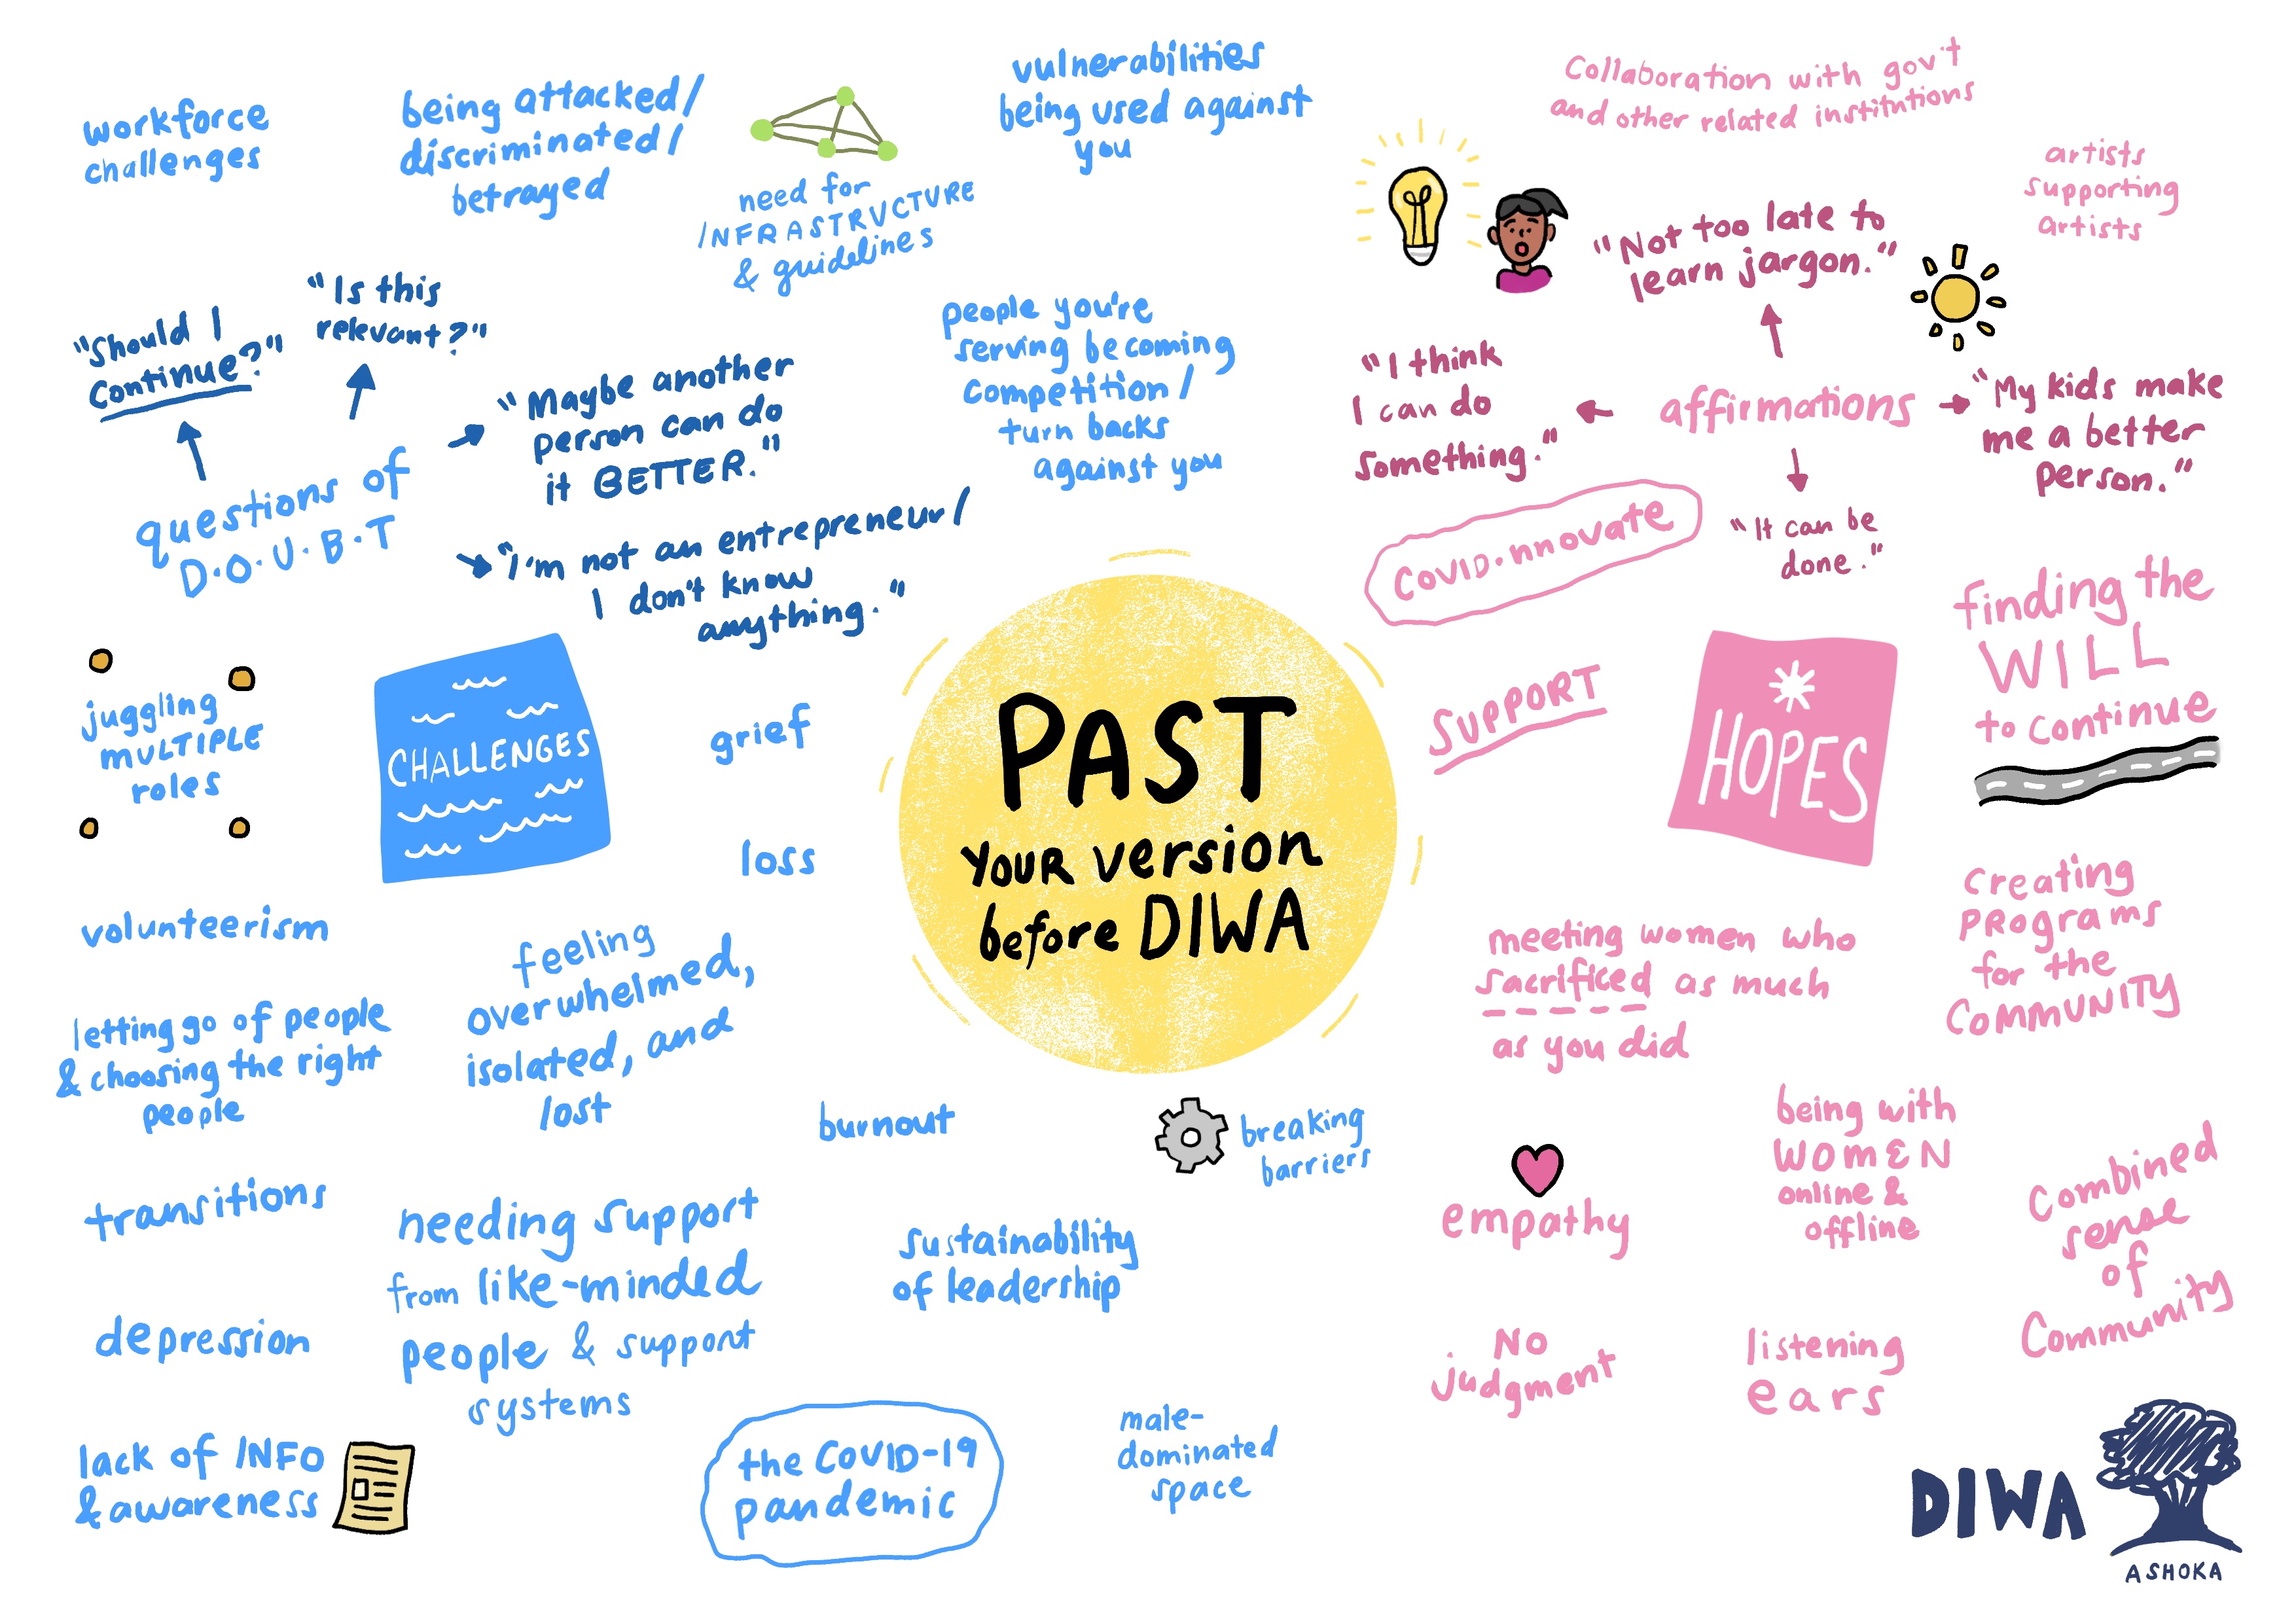 An illustration of insights for the past versions of DIWA participants